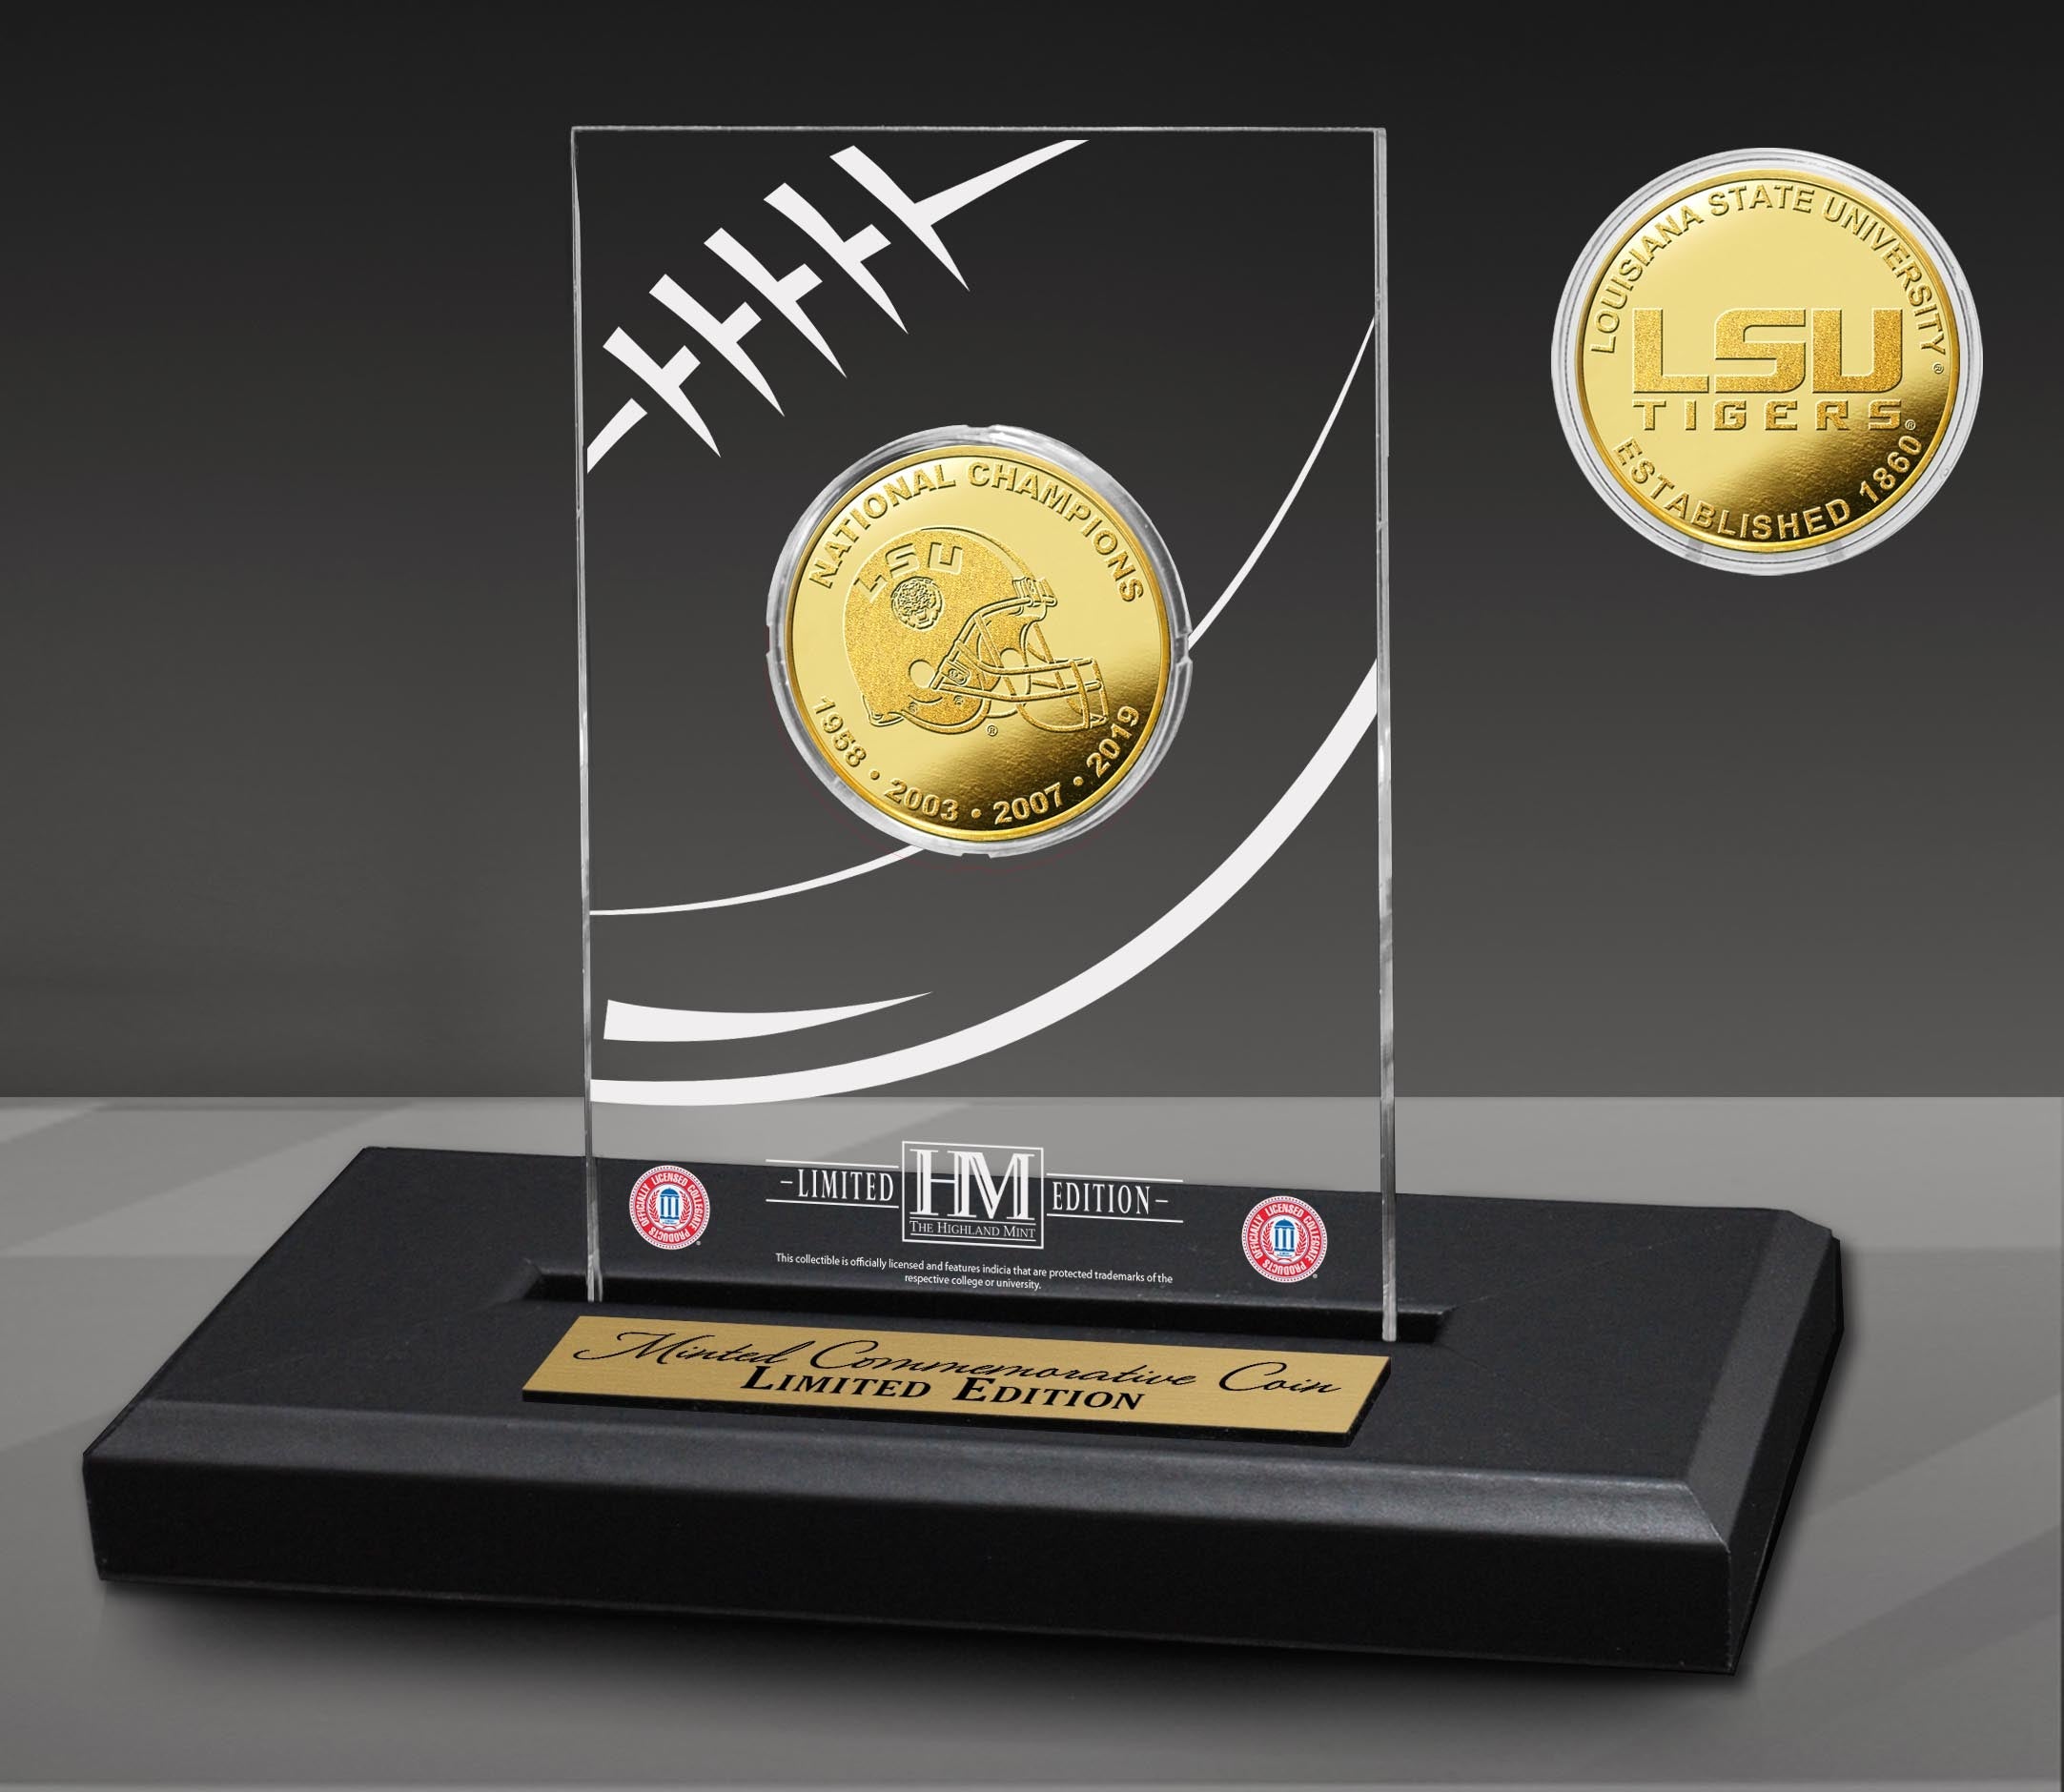 Louisiana State University Tigers 4-Time National Champions Gold Coin in Acrylic Display